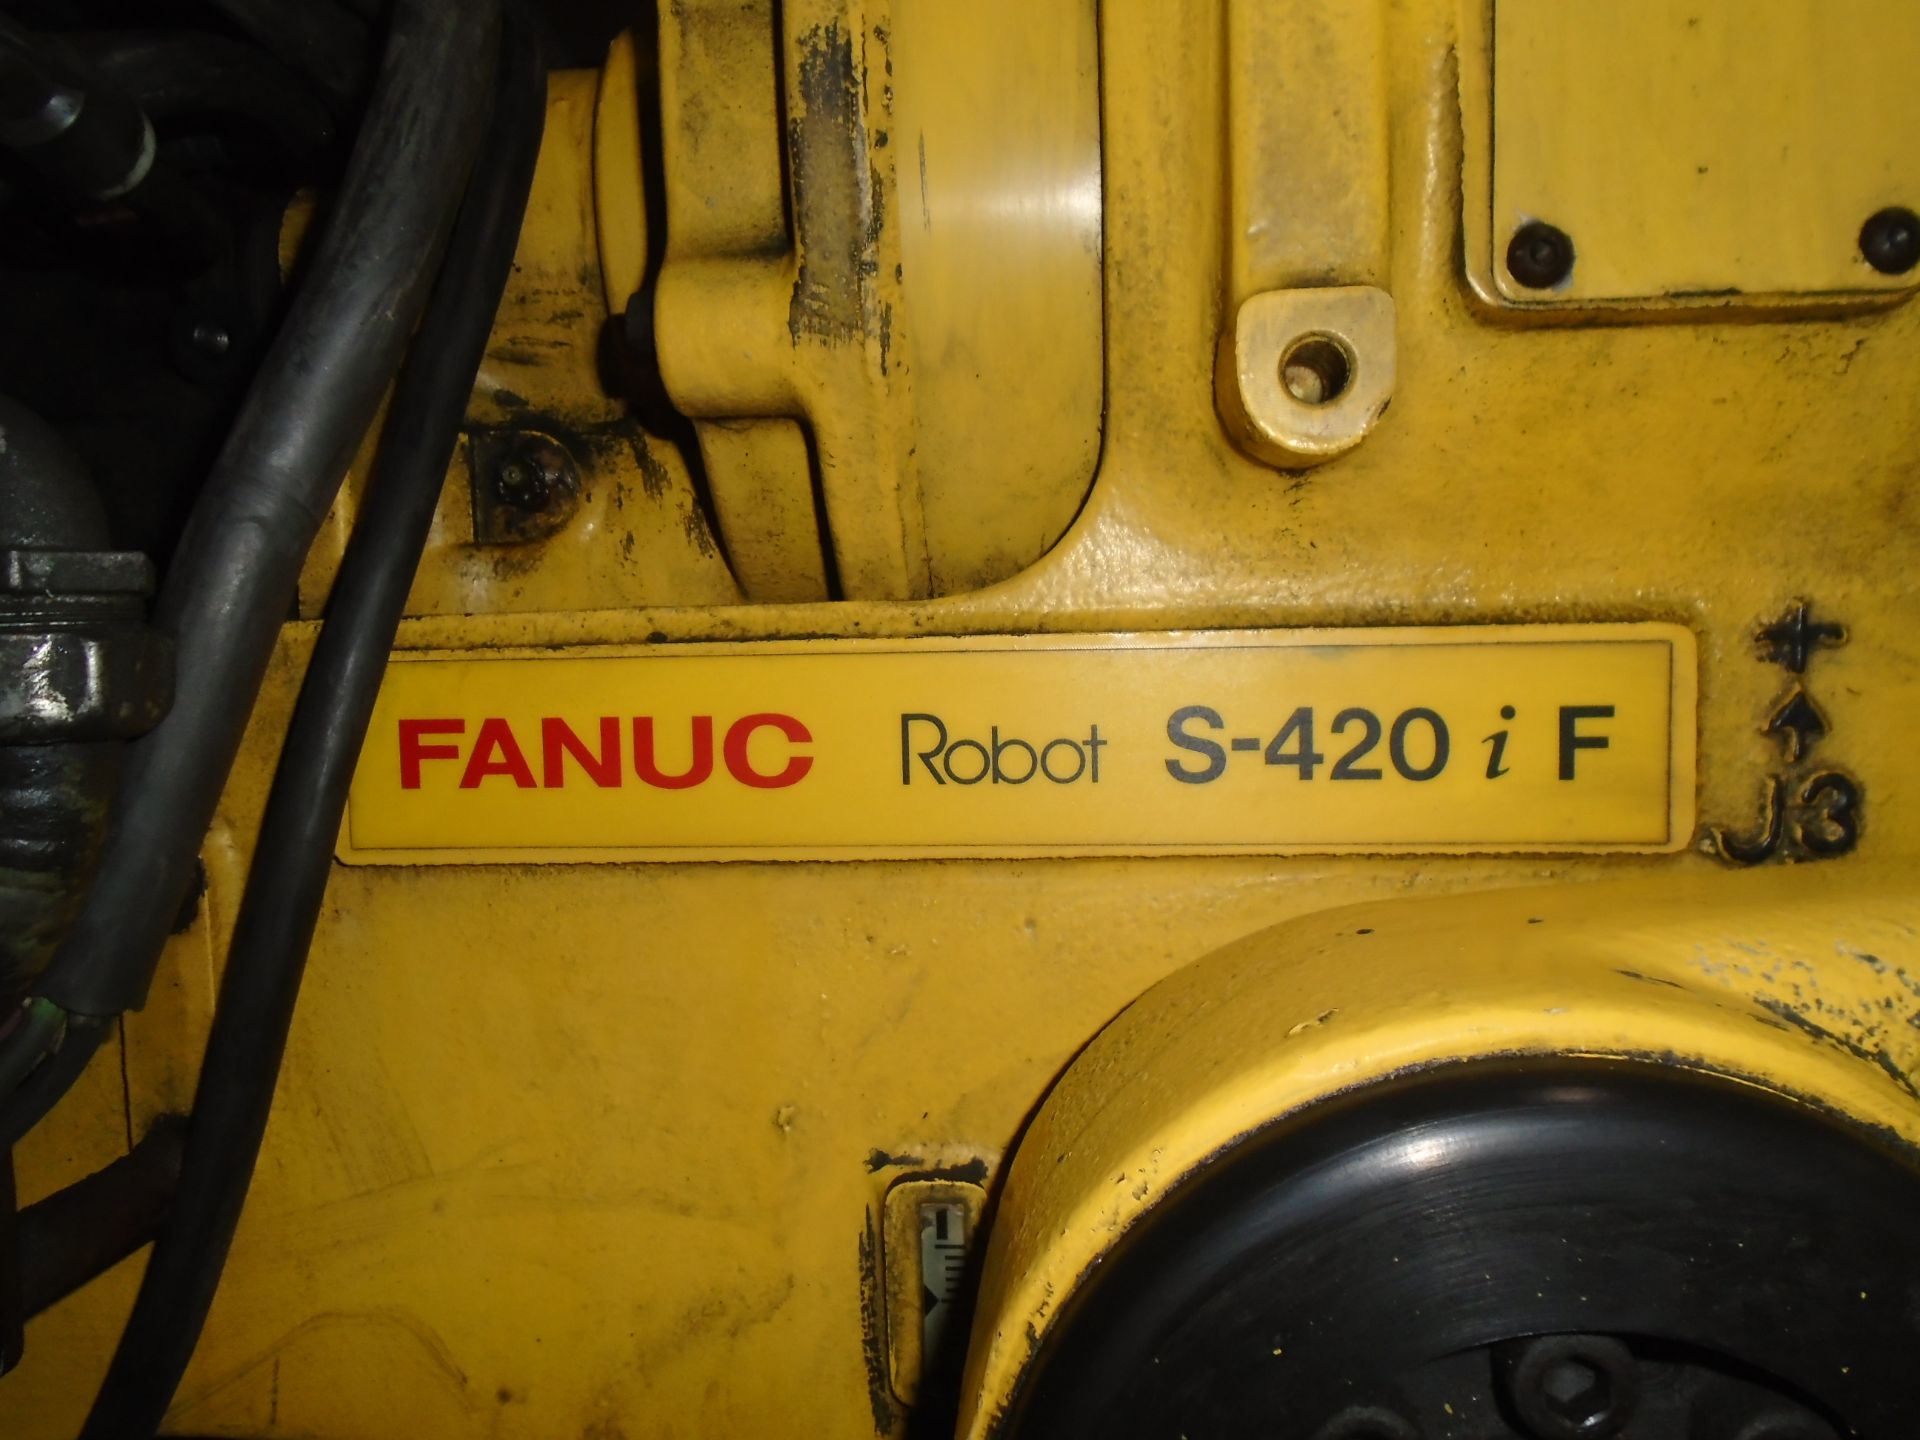 Fanuc S420iF 6 Axis Robot 140 KG Payload RJ2 Controller With Tech Pendent - Image 9 of 10